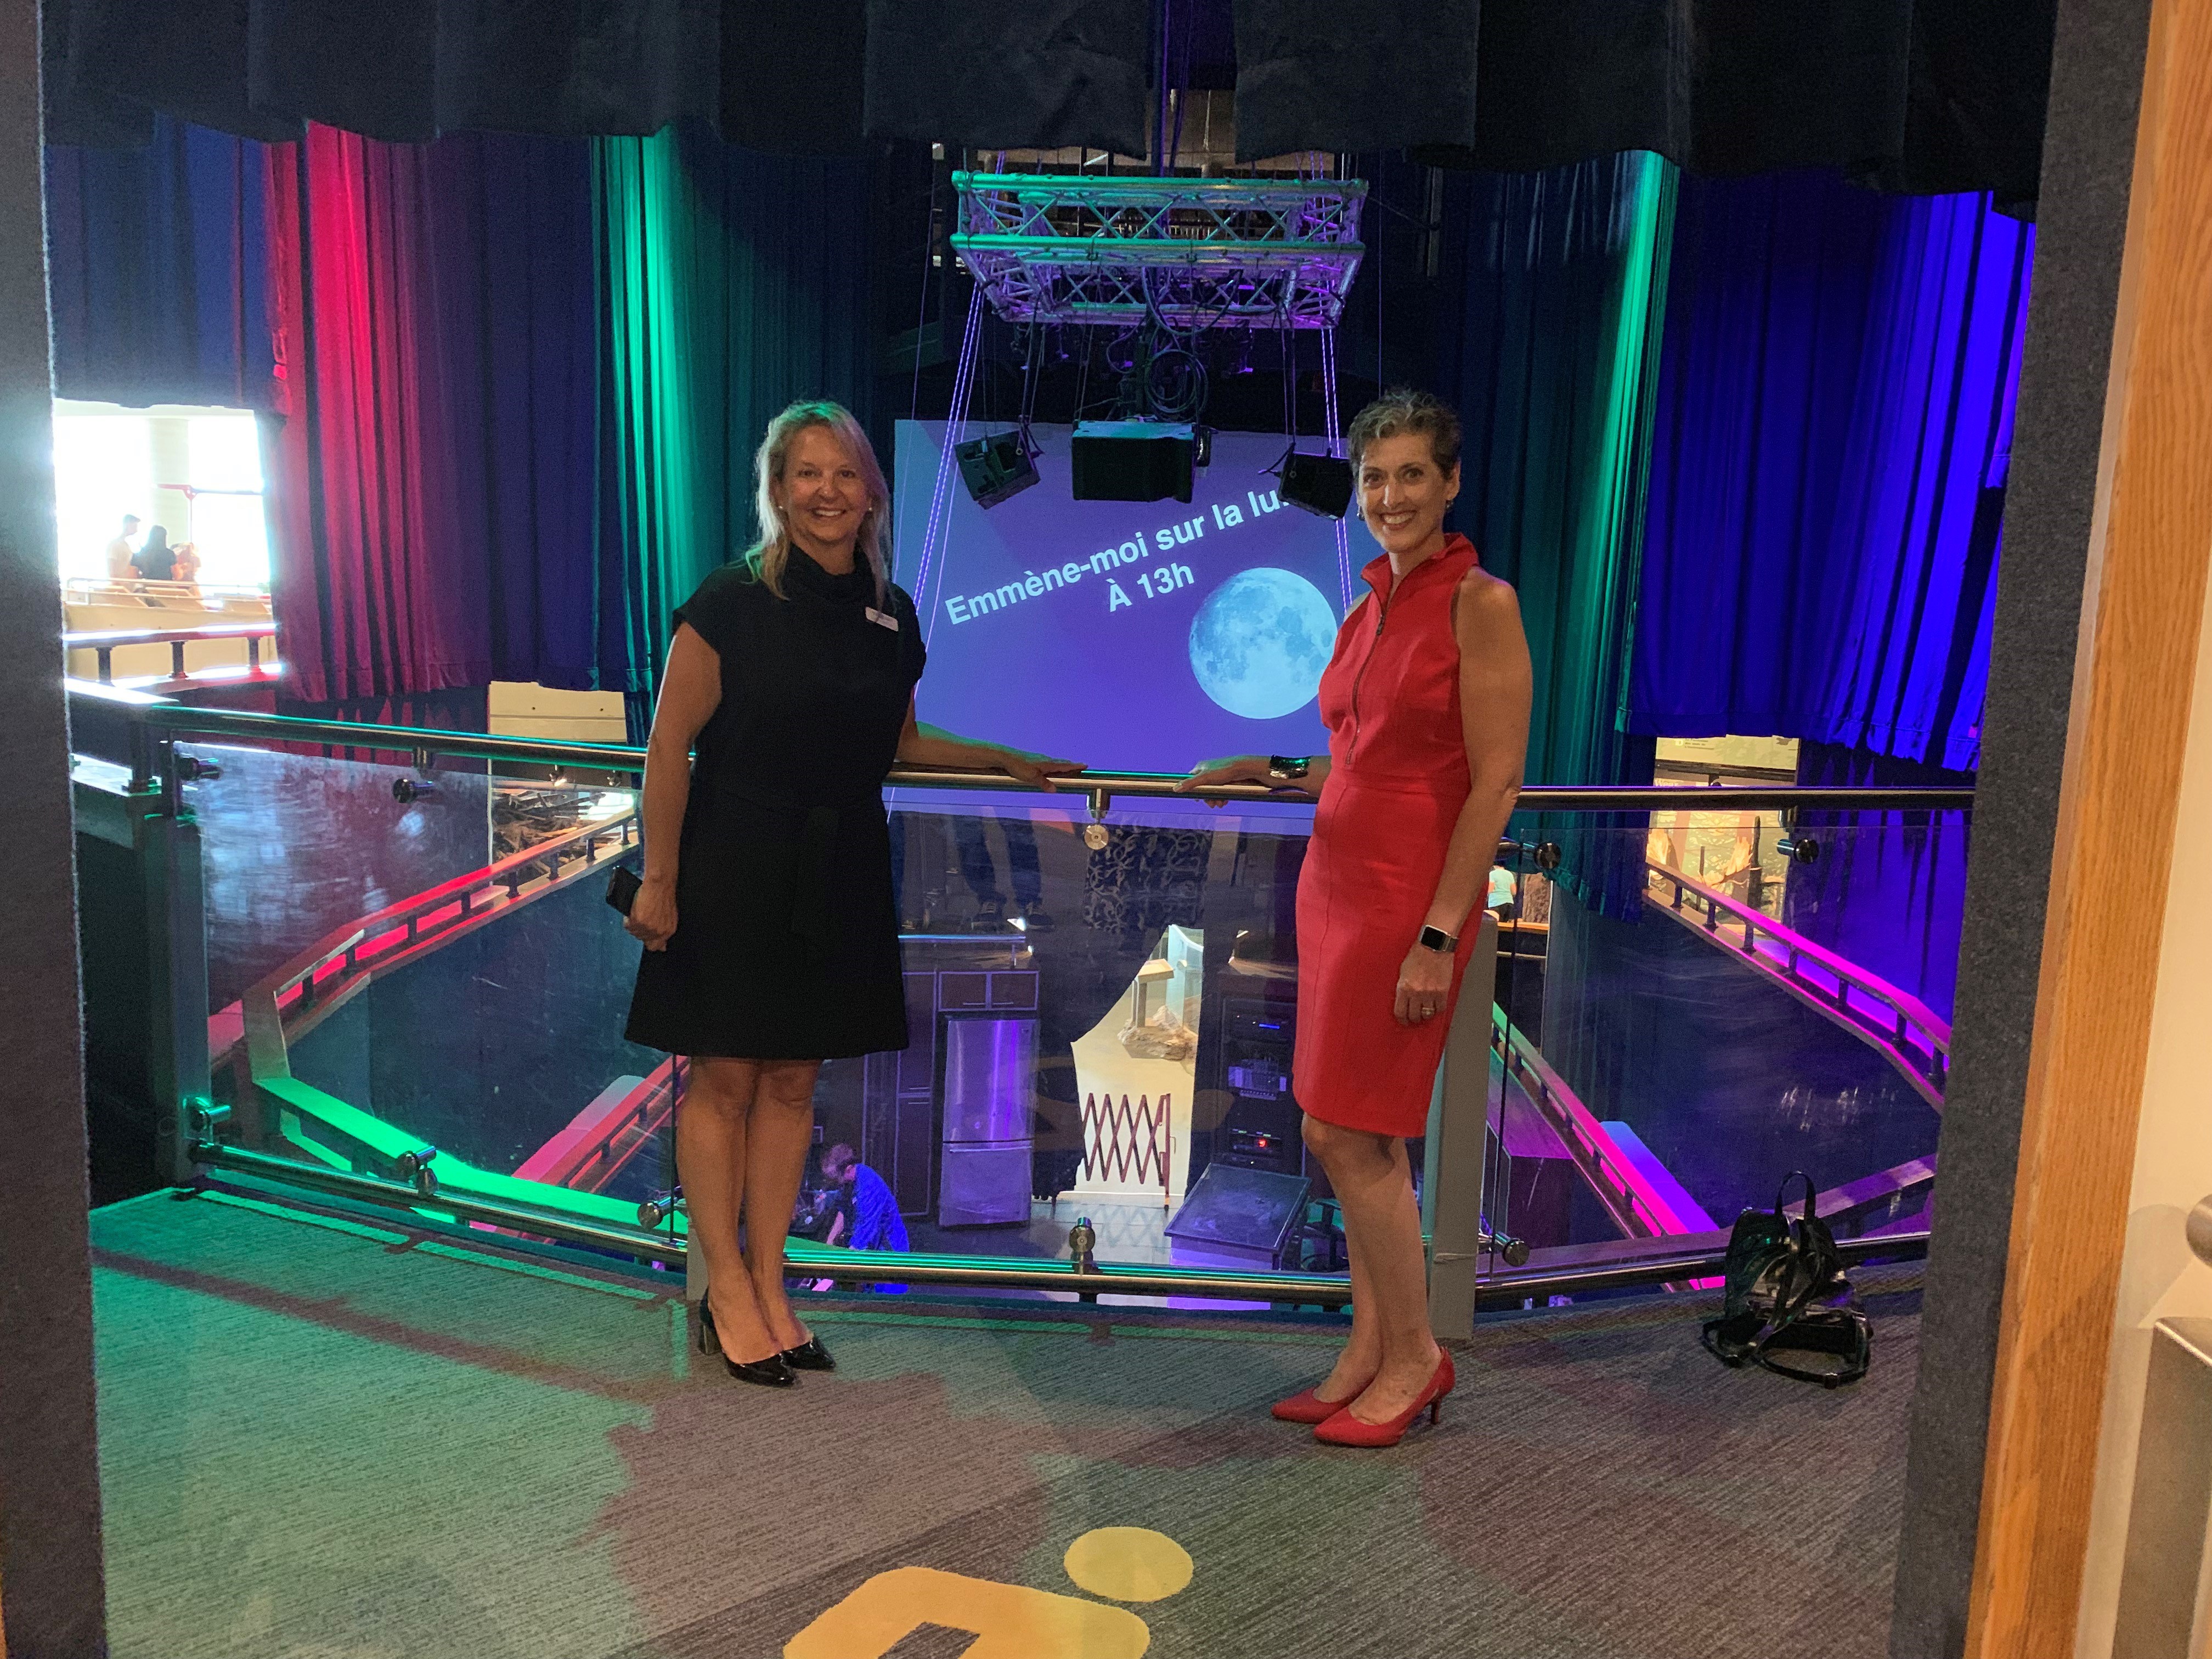 Senator Josée Forest-Niesing with Julie Moskalyk, science director of Science North, during a visit to the museum in her region of Sudbury on July 9, 2019.